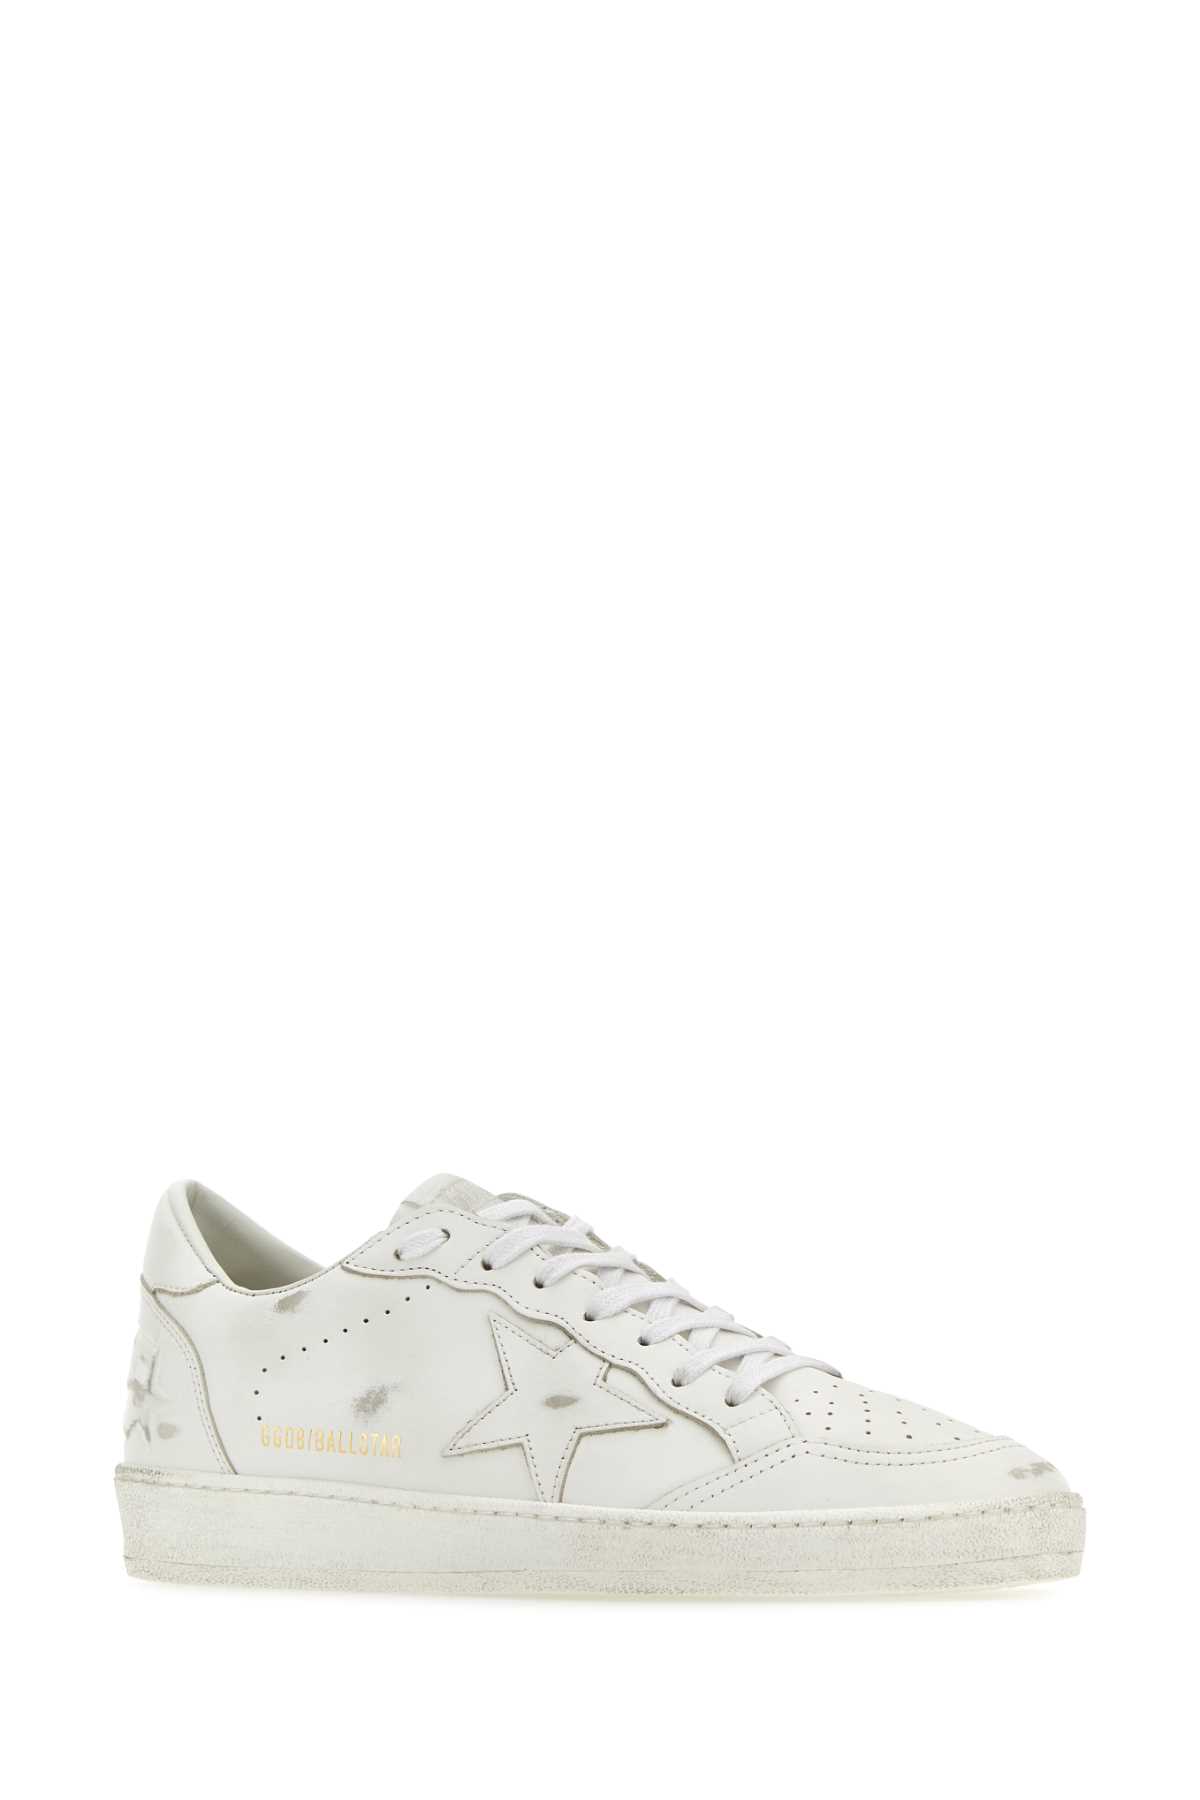 Shop Golden Goose White Leather Ball Star Sneakers In Opticwhite